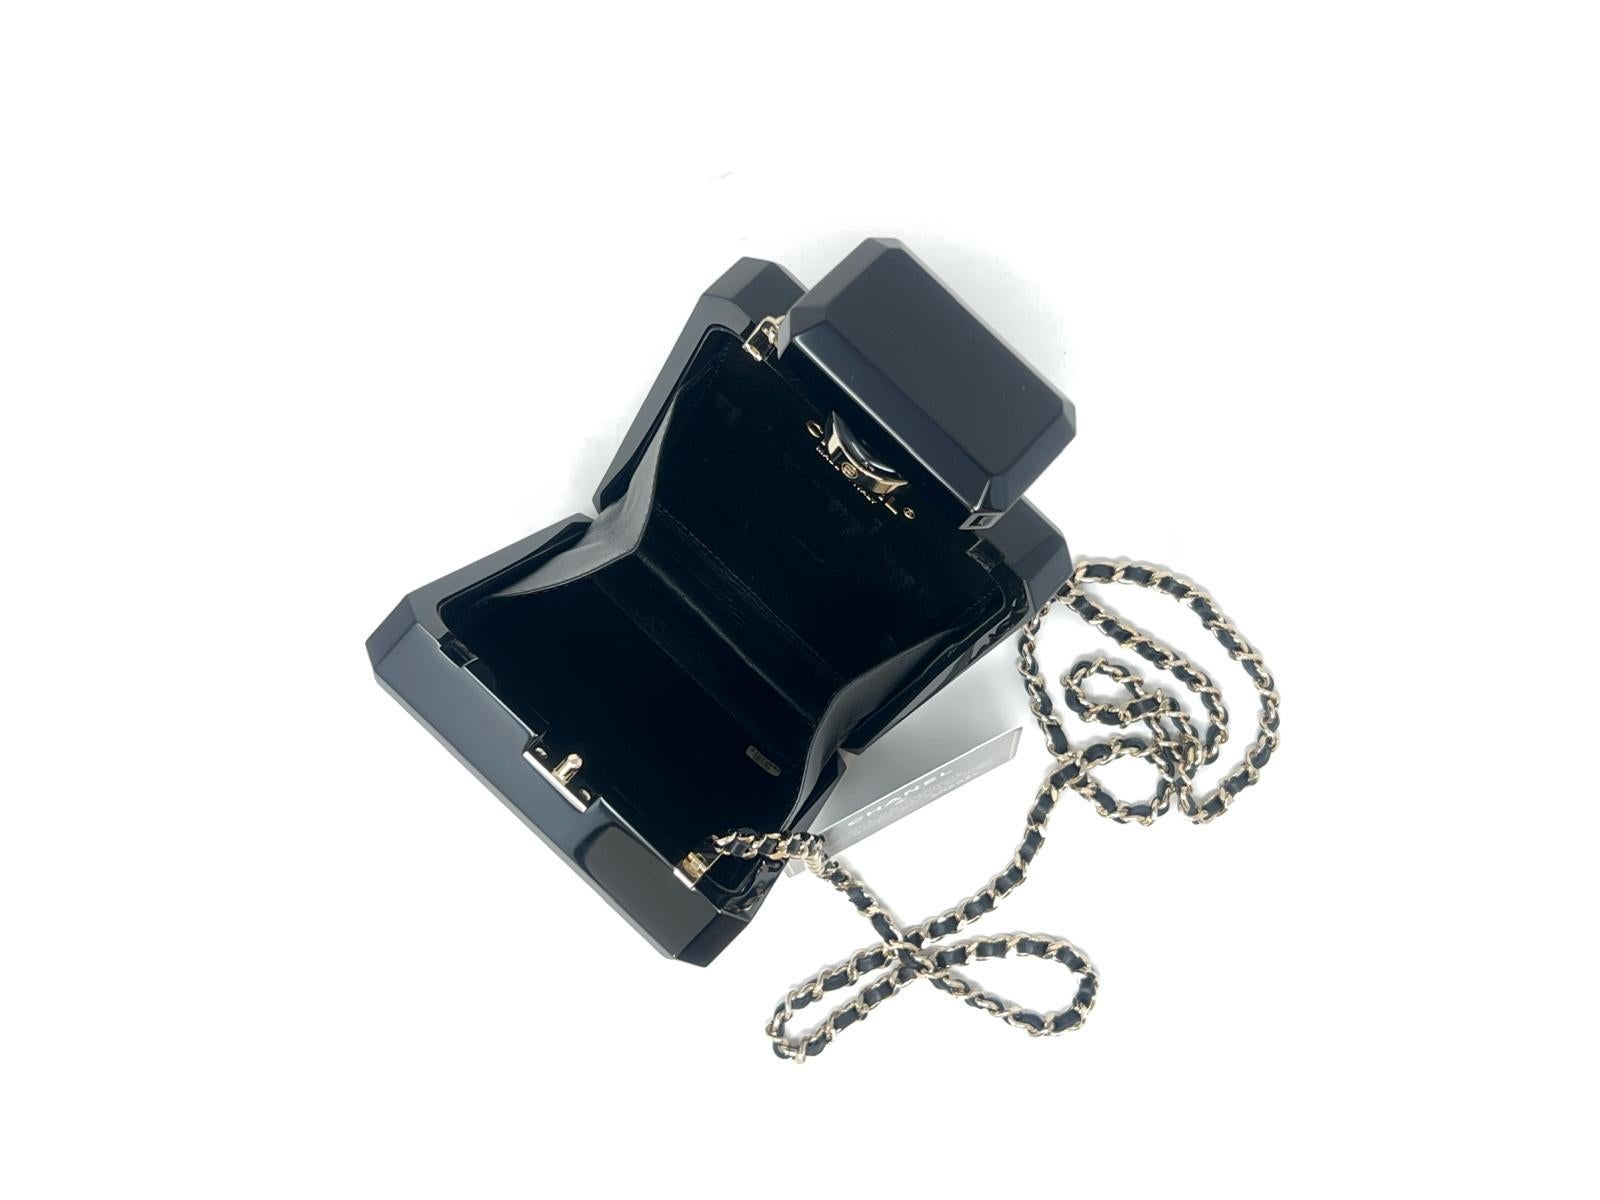 Chanel N5 Black Perfume Bottle Minaudière Cruise Collection 2013  For Sale 2